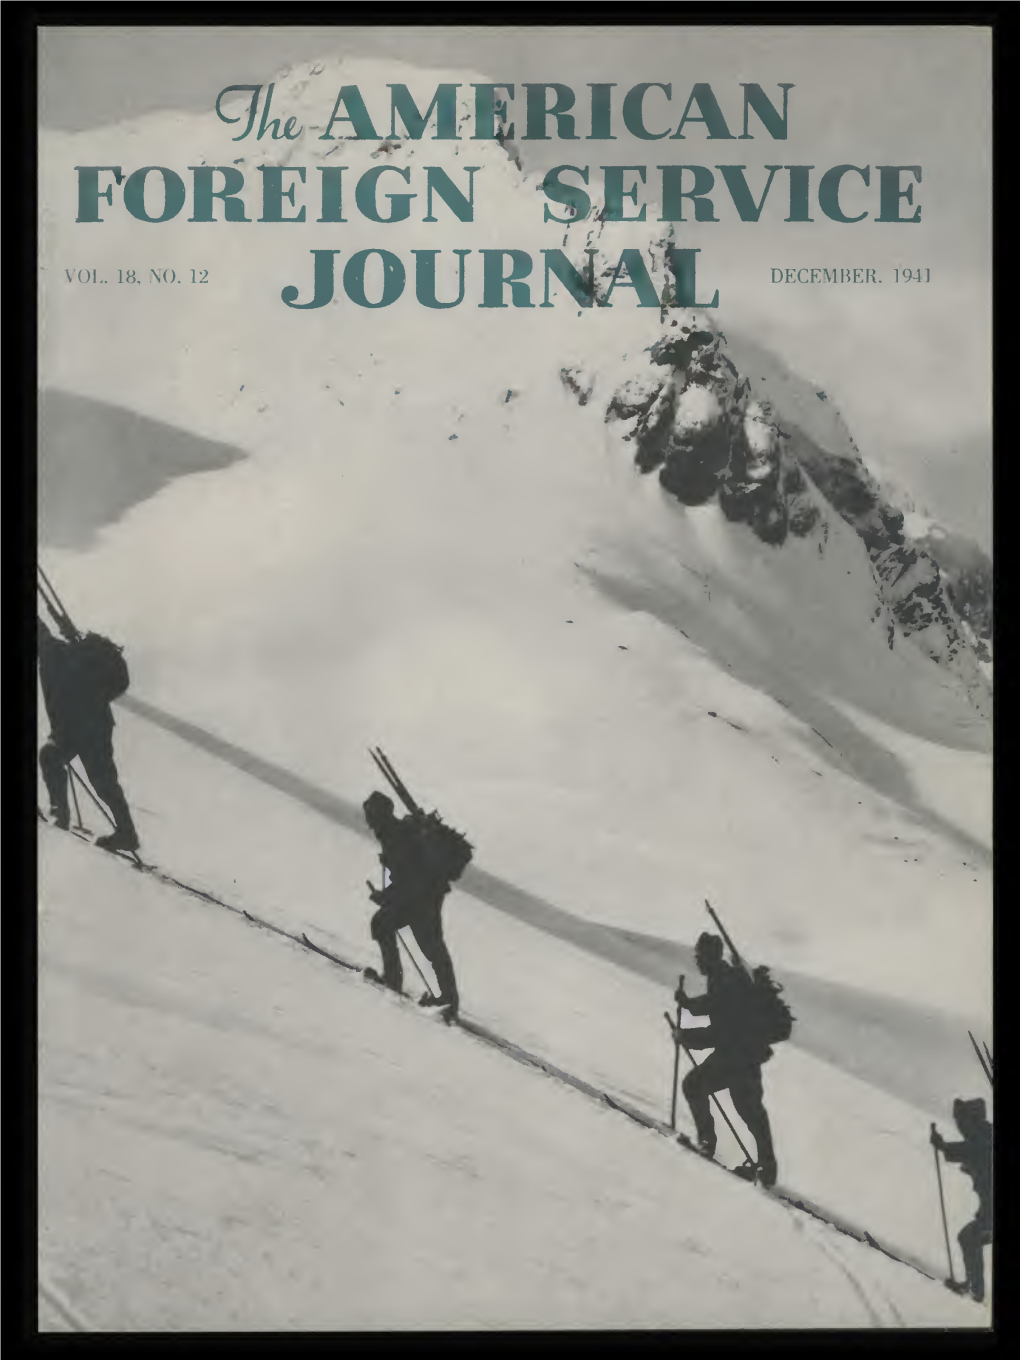 The Foreign Service Journal, December 1941